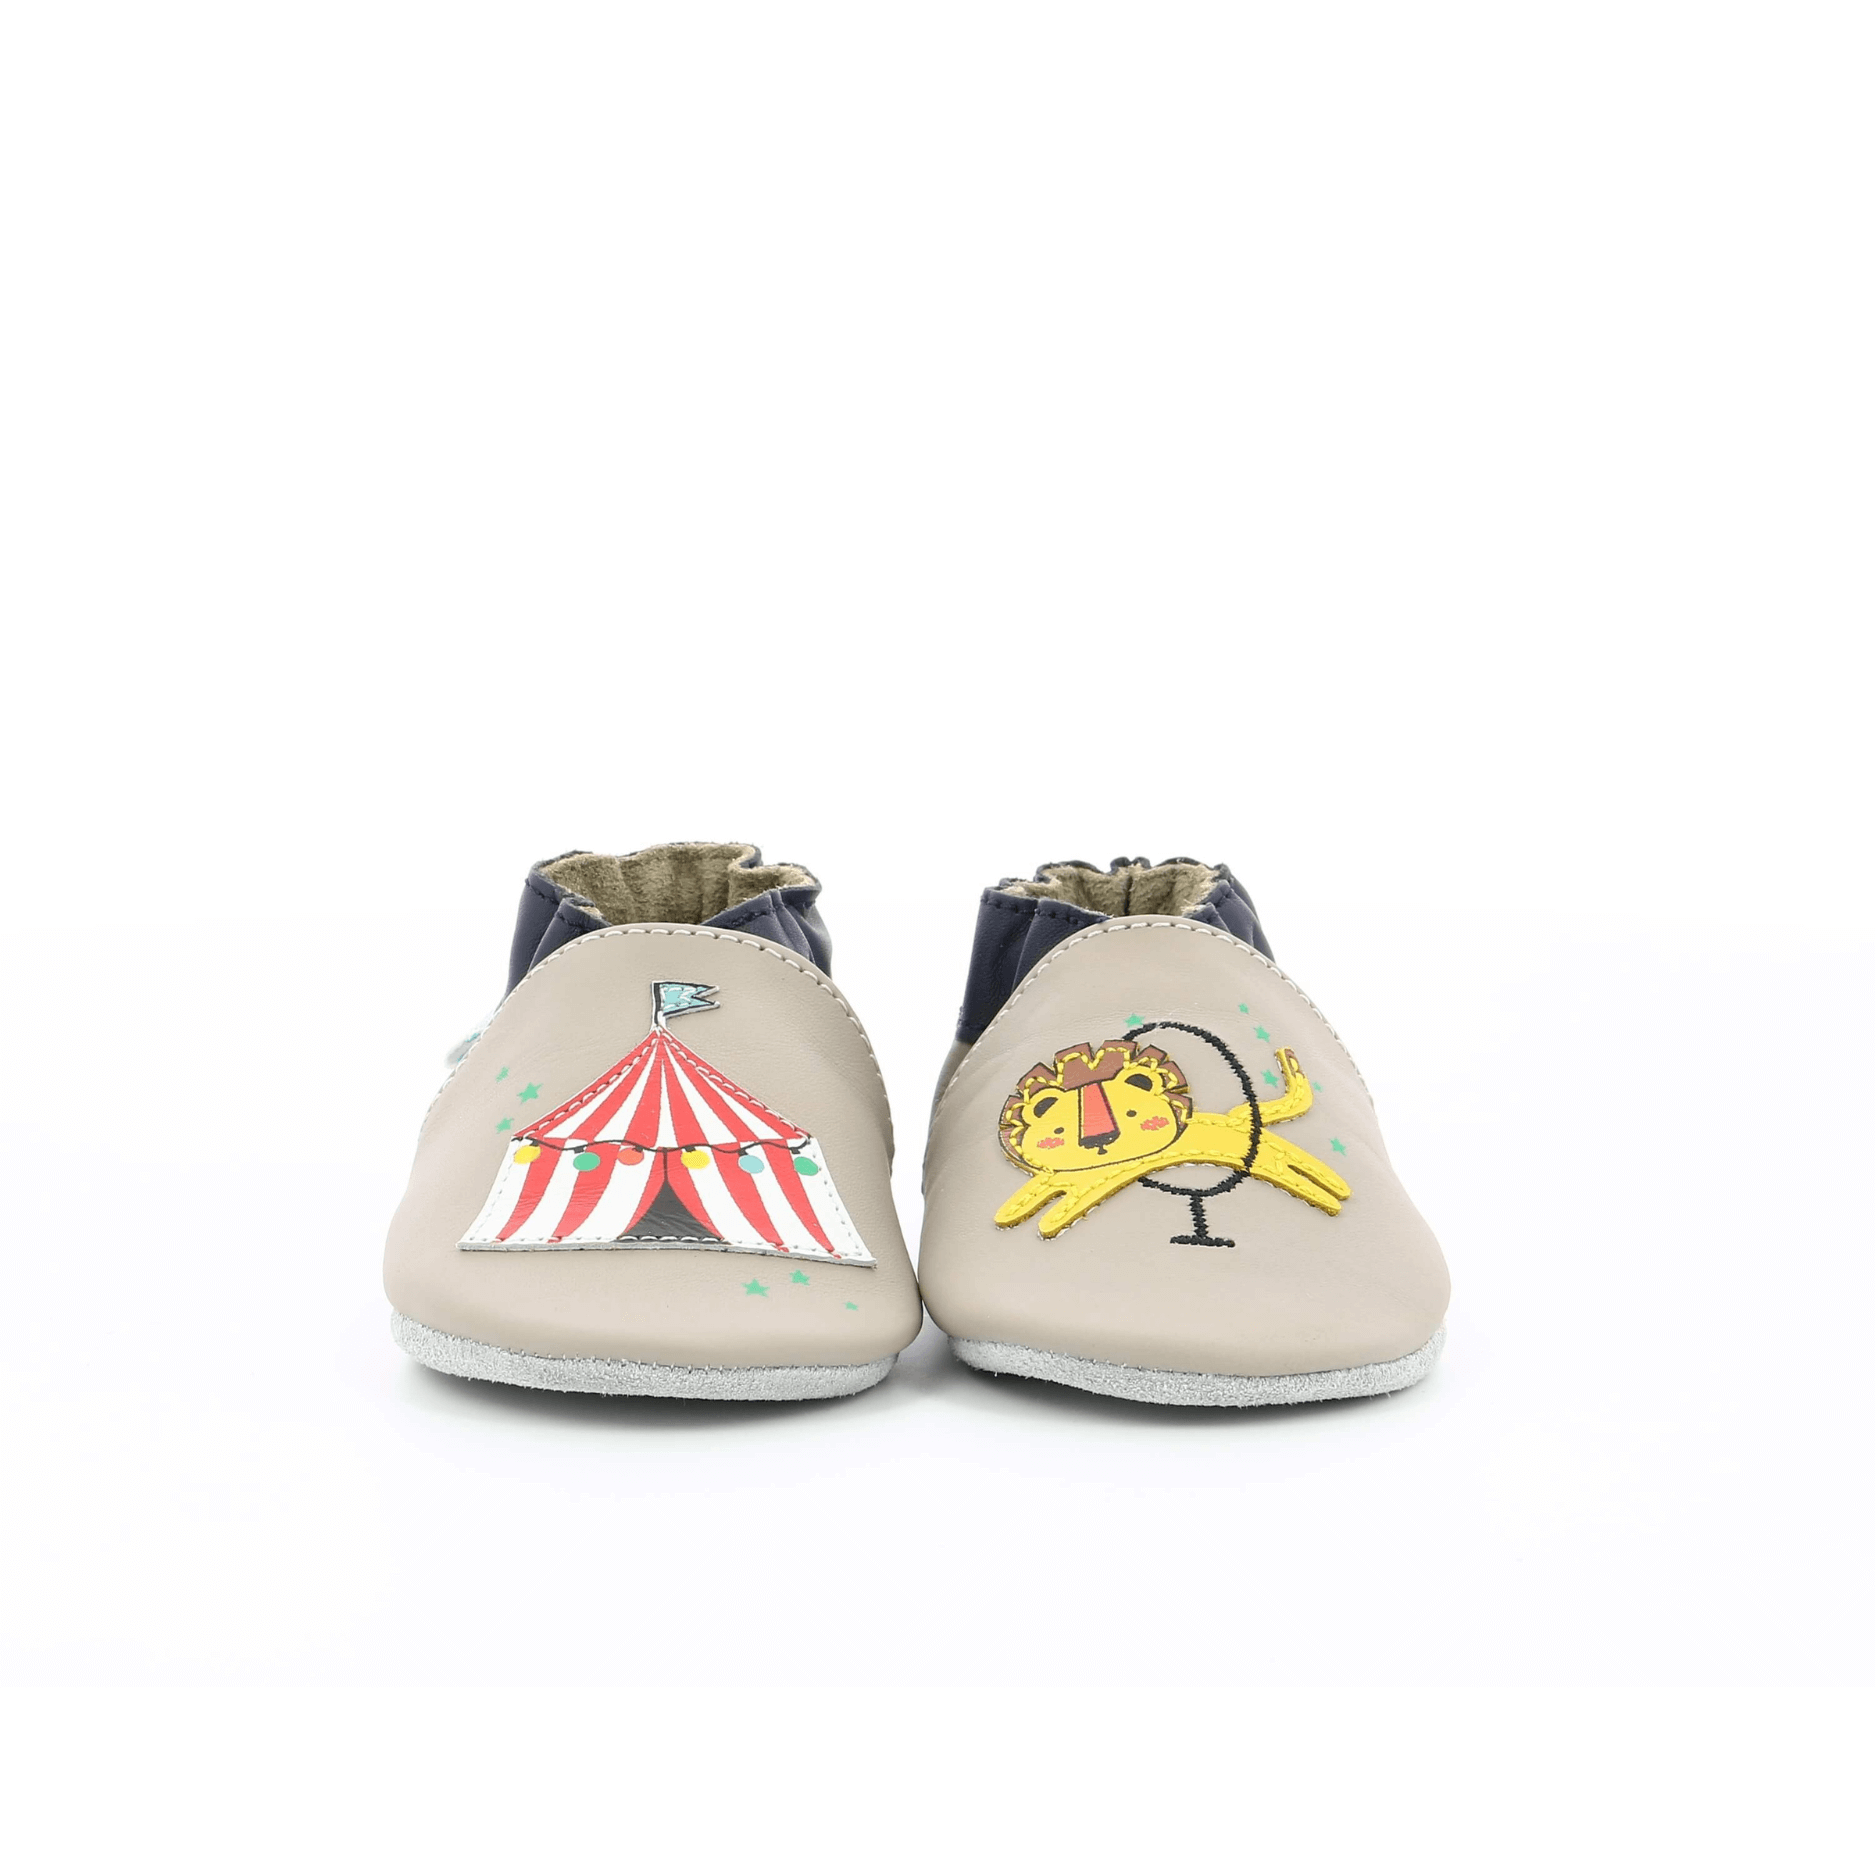 ROBEEZ Chaussons Lion Circus Gris Taupe ma petite pointure 